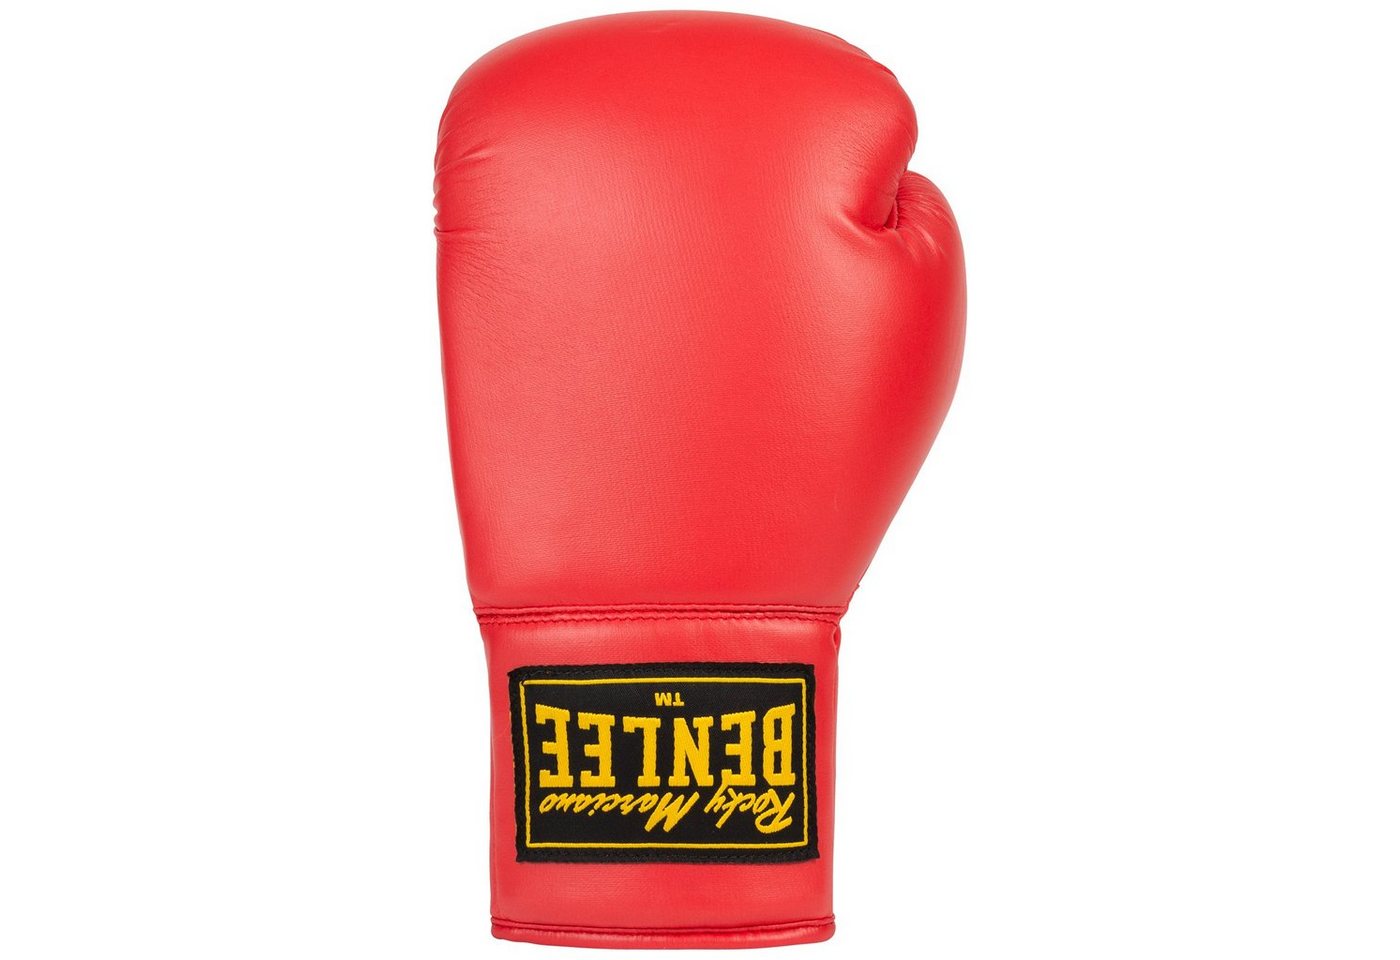 Benlee Rocky Marciano Boxhandschuhe AUTOGRAPH GLOVES von Benlee Rocky Marciano